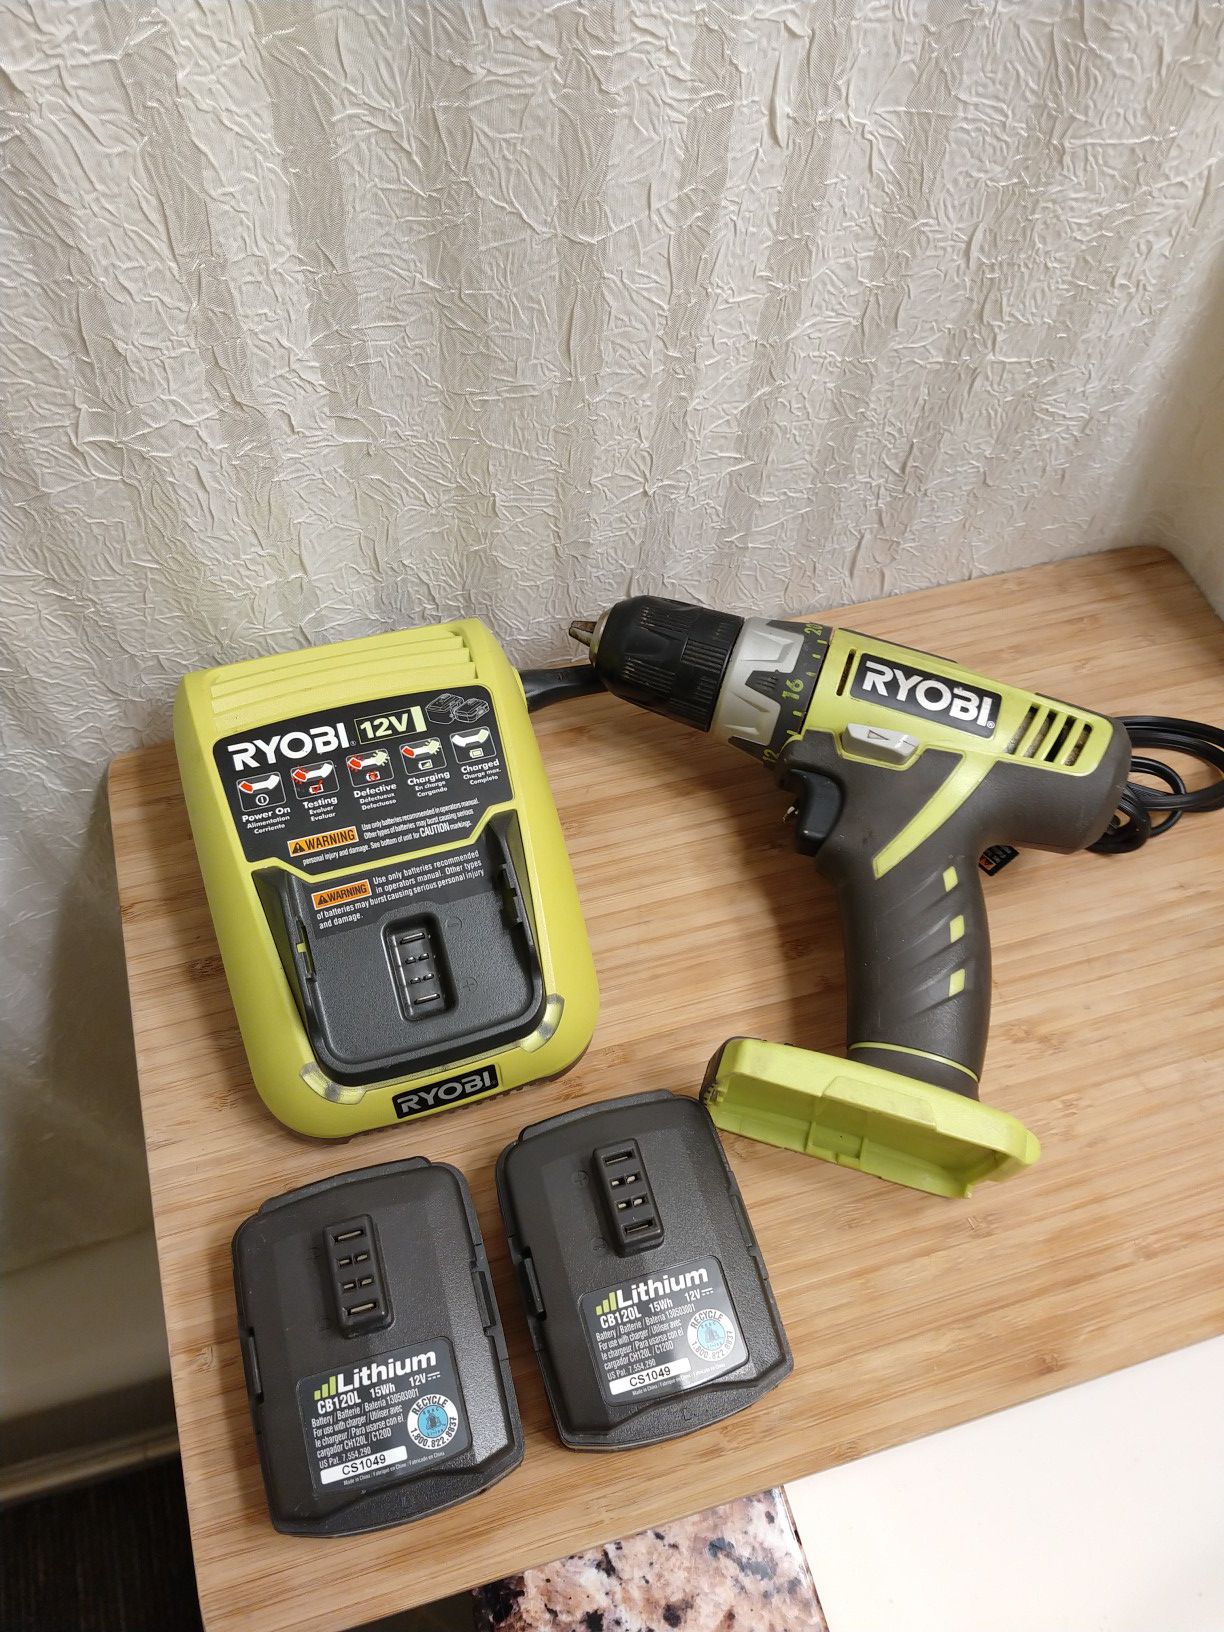 RYOBI 12v DRILL / 2 Lithium BATTERIES & CHARGER ★ EXCELLENT WORKING CONDITION